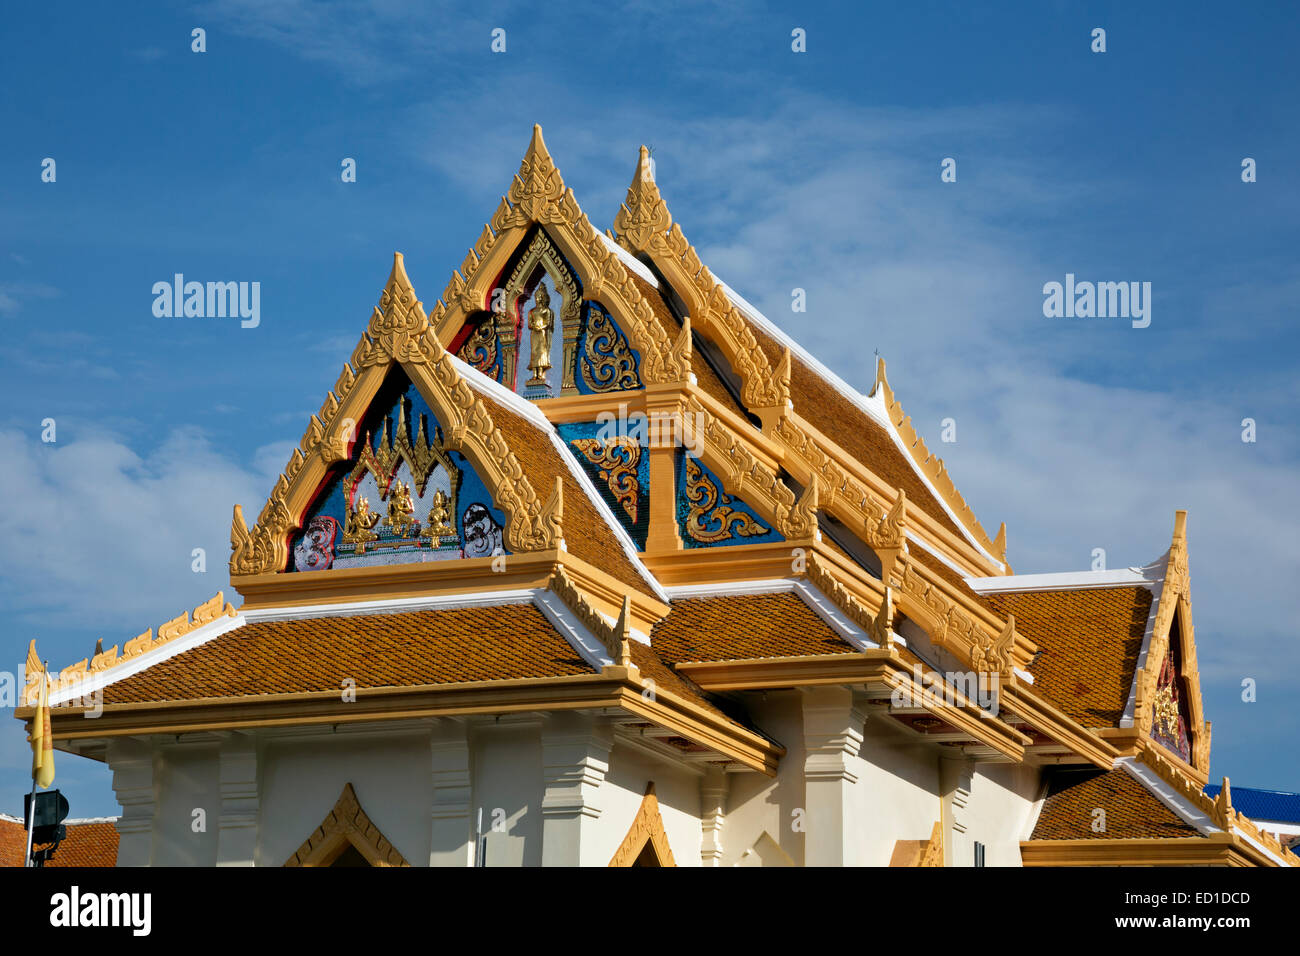 TH00178-00...THAILAND - Incredible artistry with the decoration of temples. This roof is one of the buildings at Wat Traimit. Stock Photo